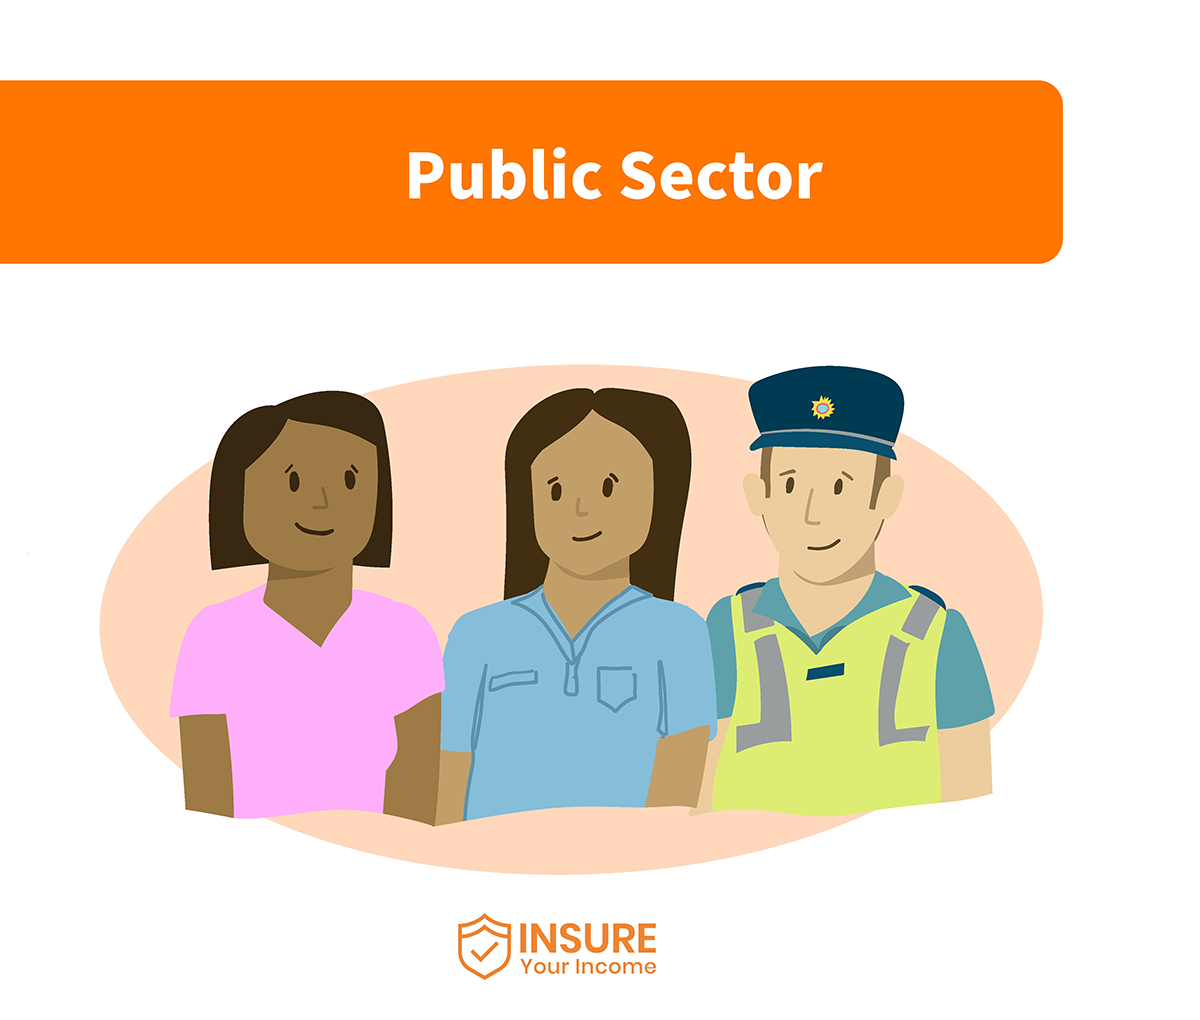 Insure your income in the public sector 